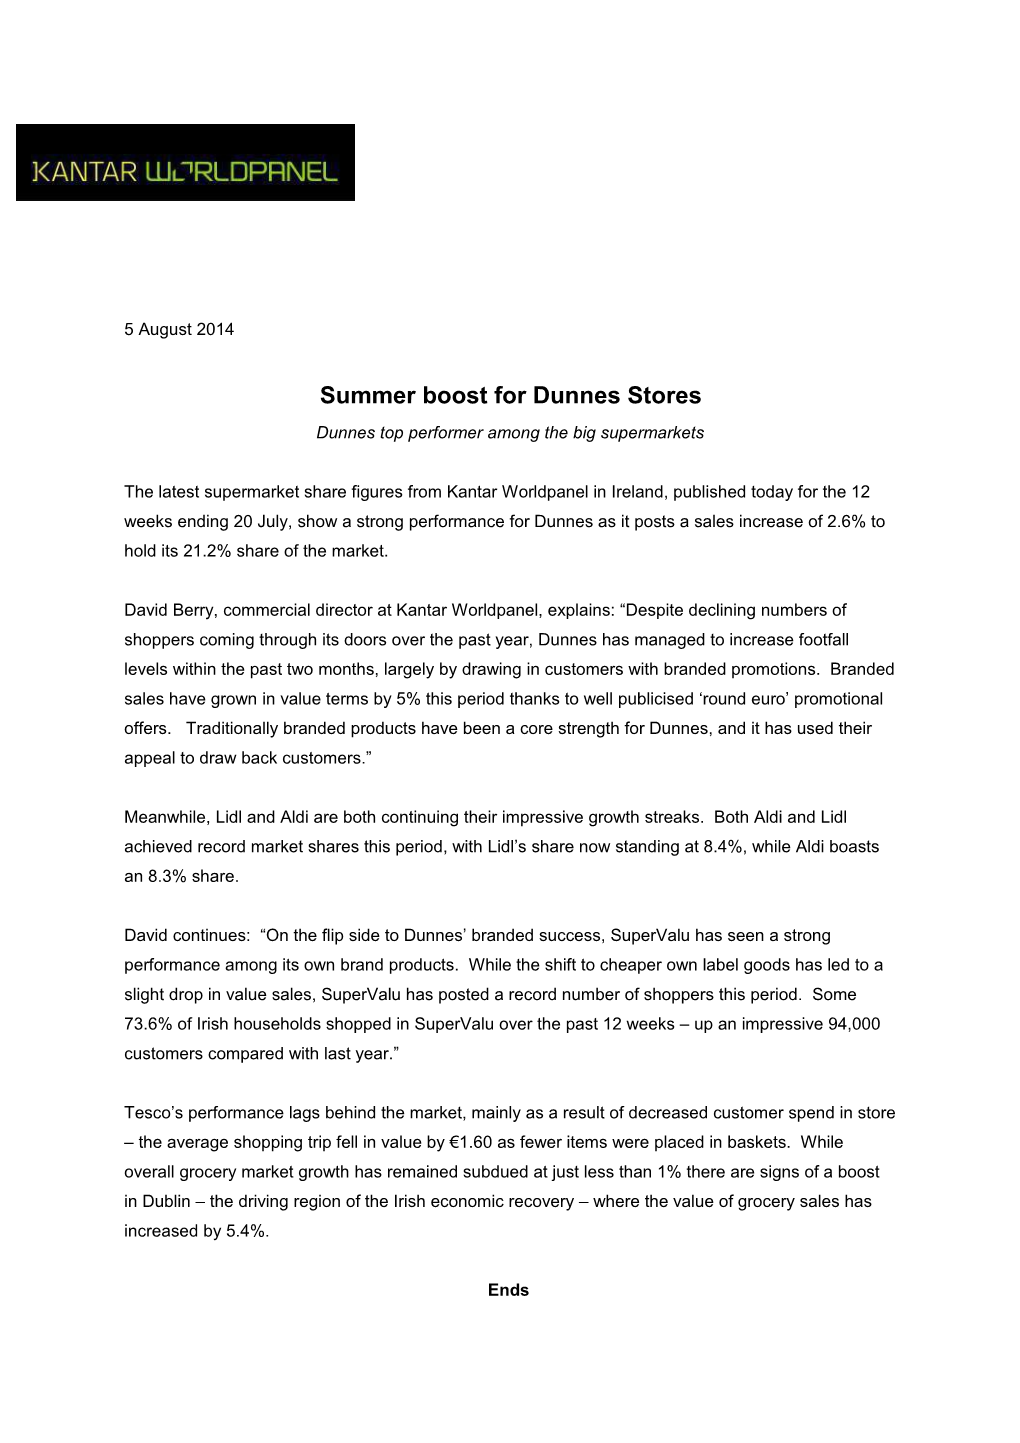 Summer Boost for Dunnes Stores